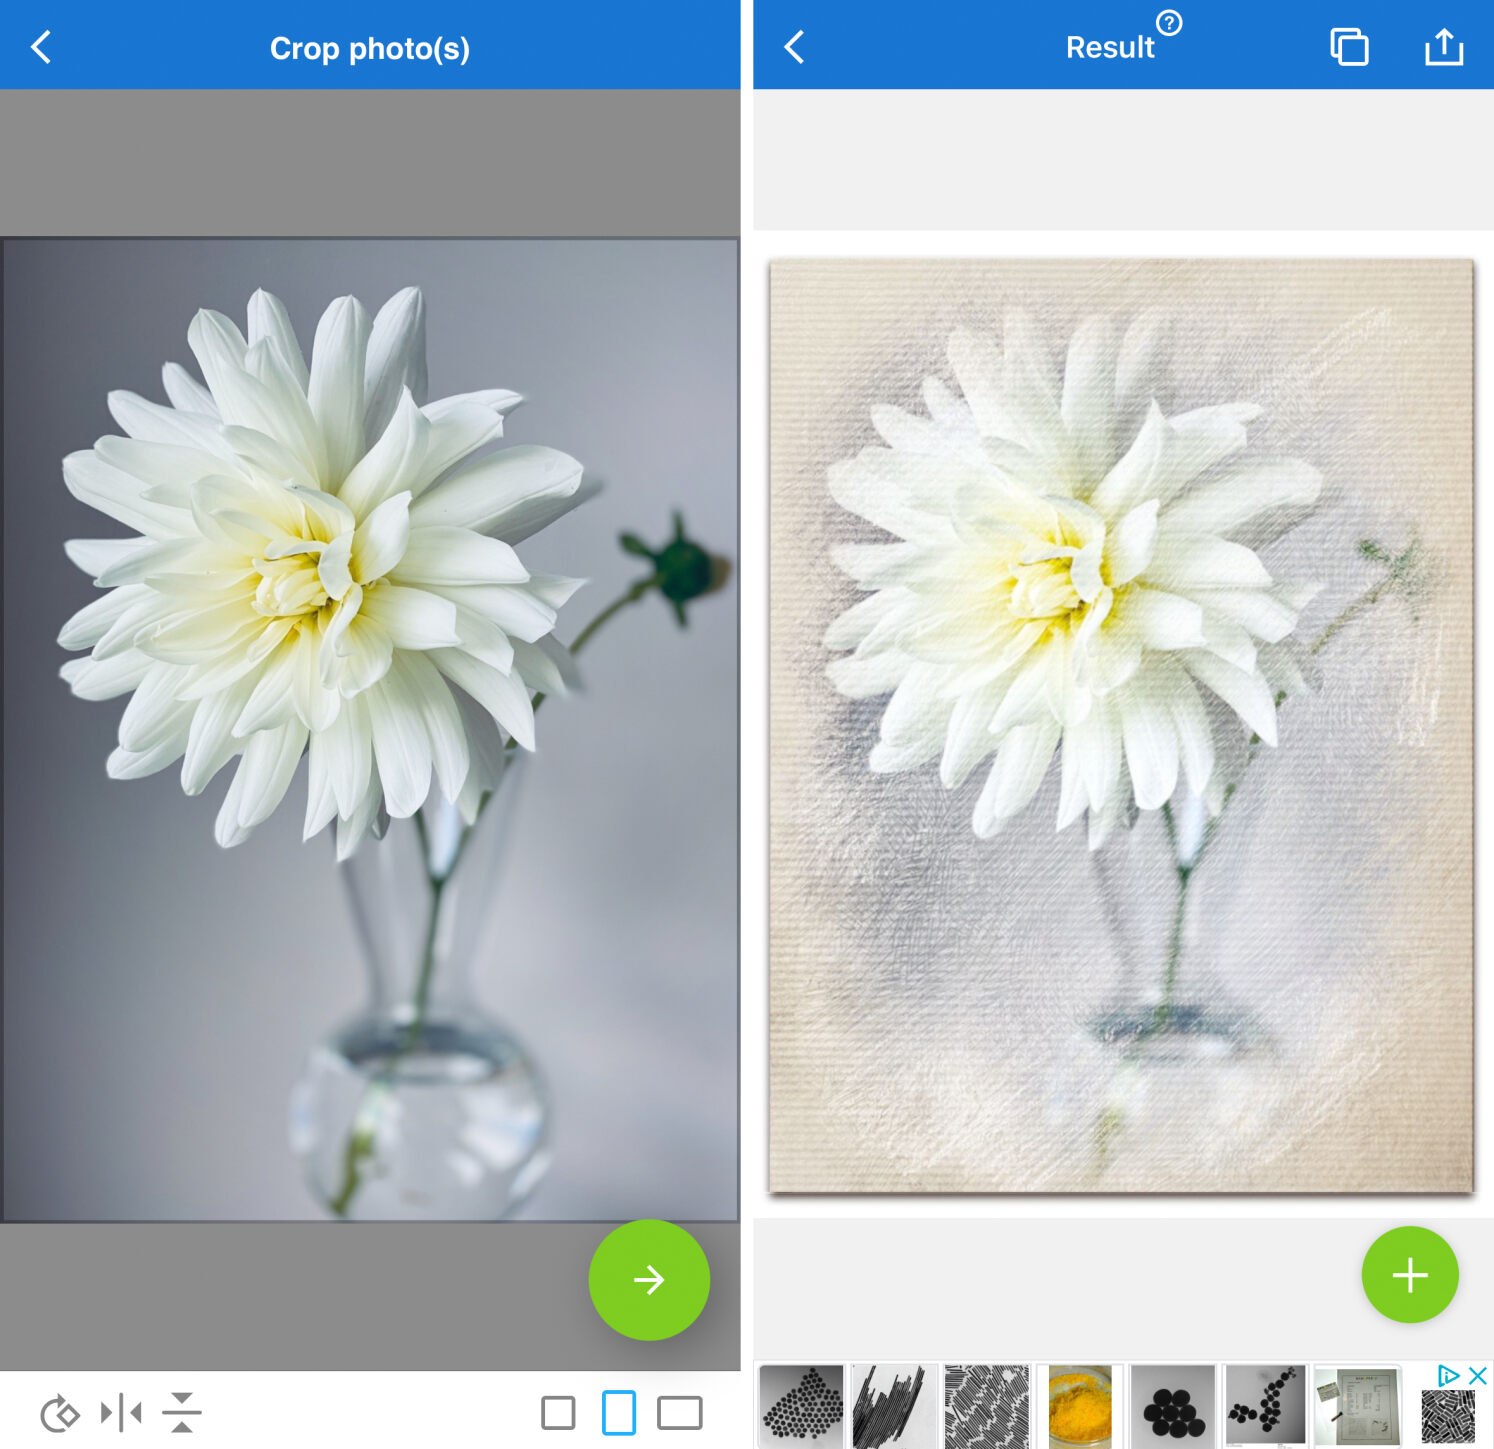 5 Best iPhone Apps That Turn Photos Into Drawings & Sketches